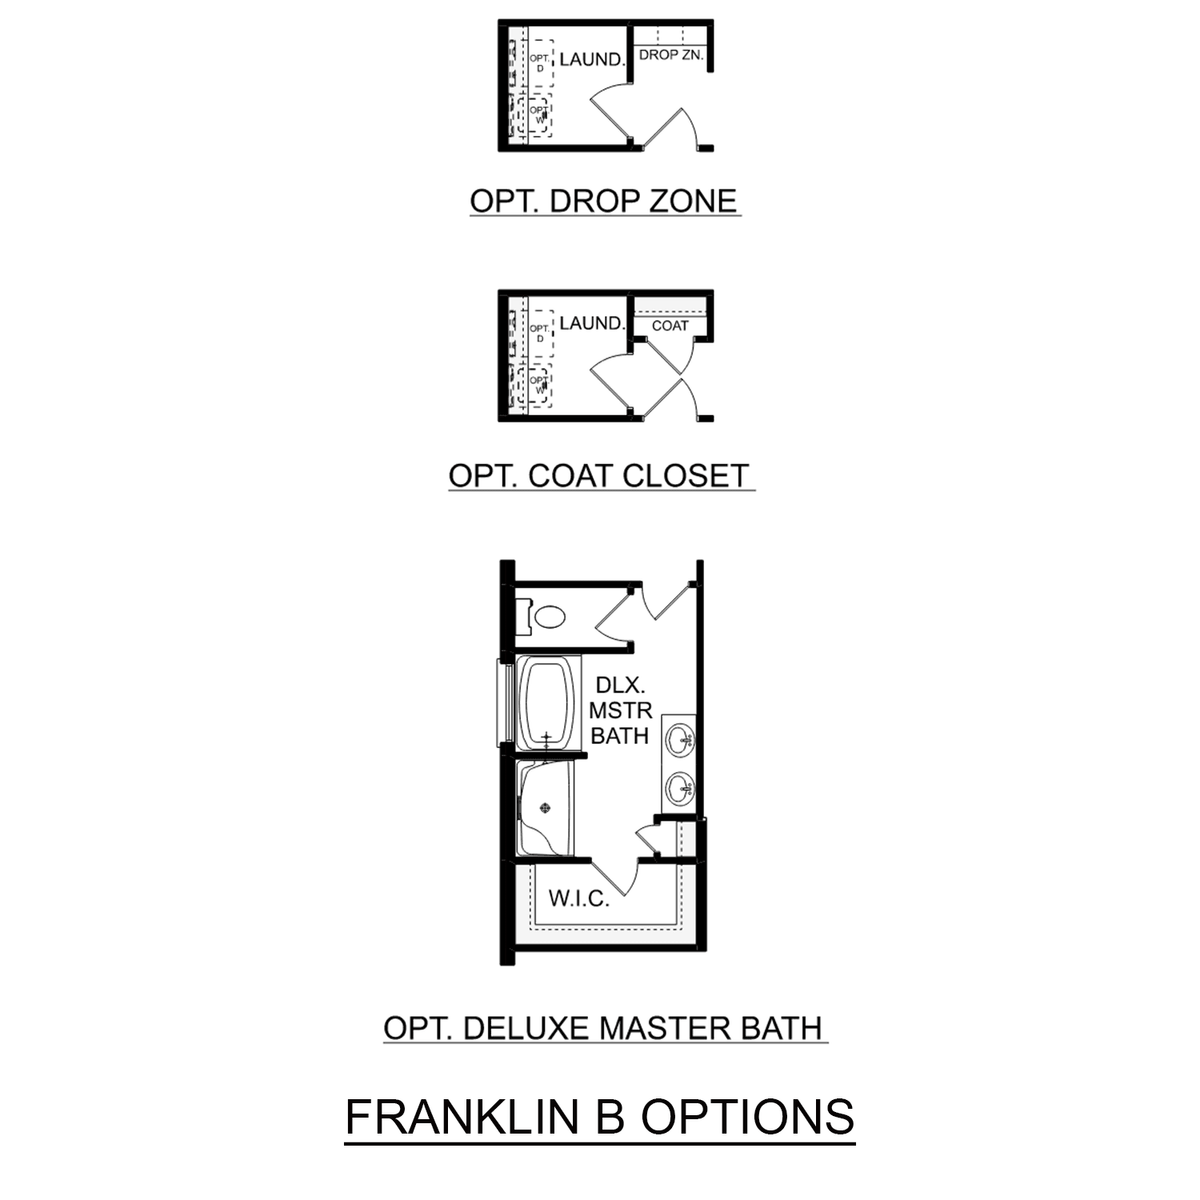 2 - The Franklin B buildable floor plan layout in Davidson Homes' Spragins Cove community.